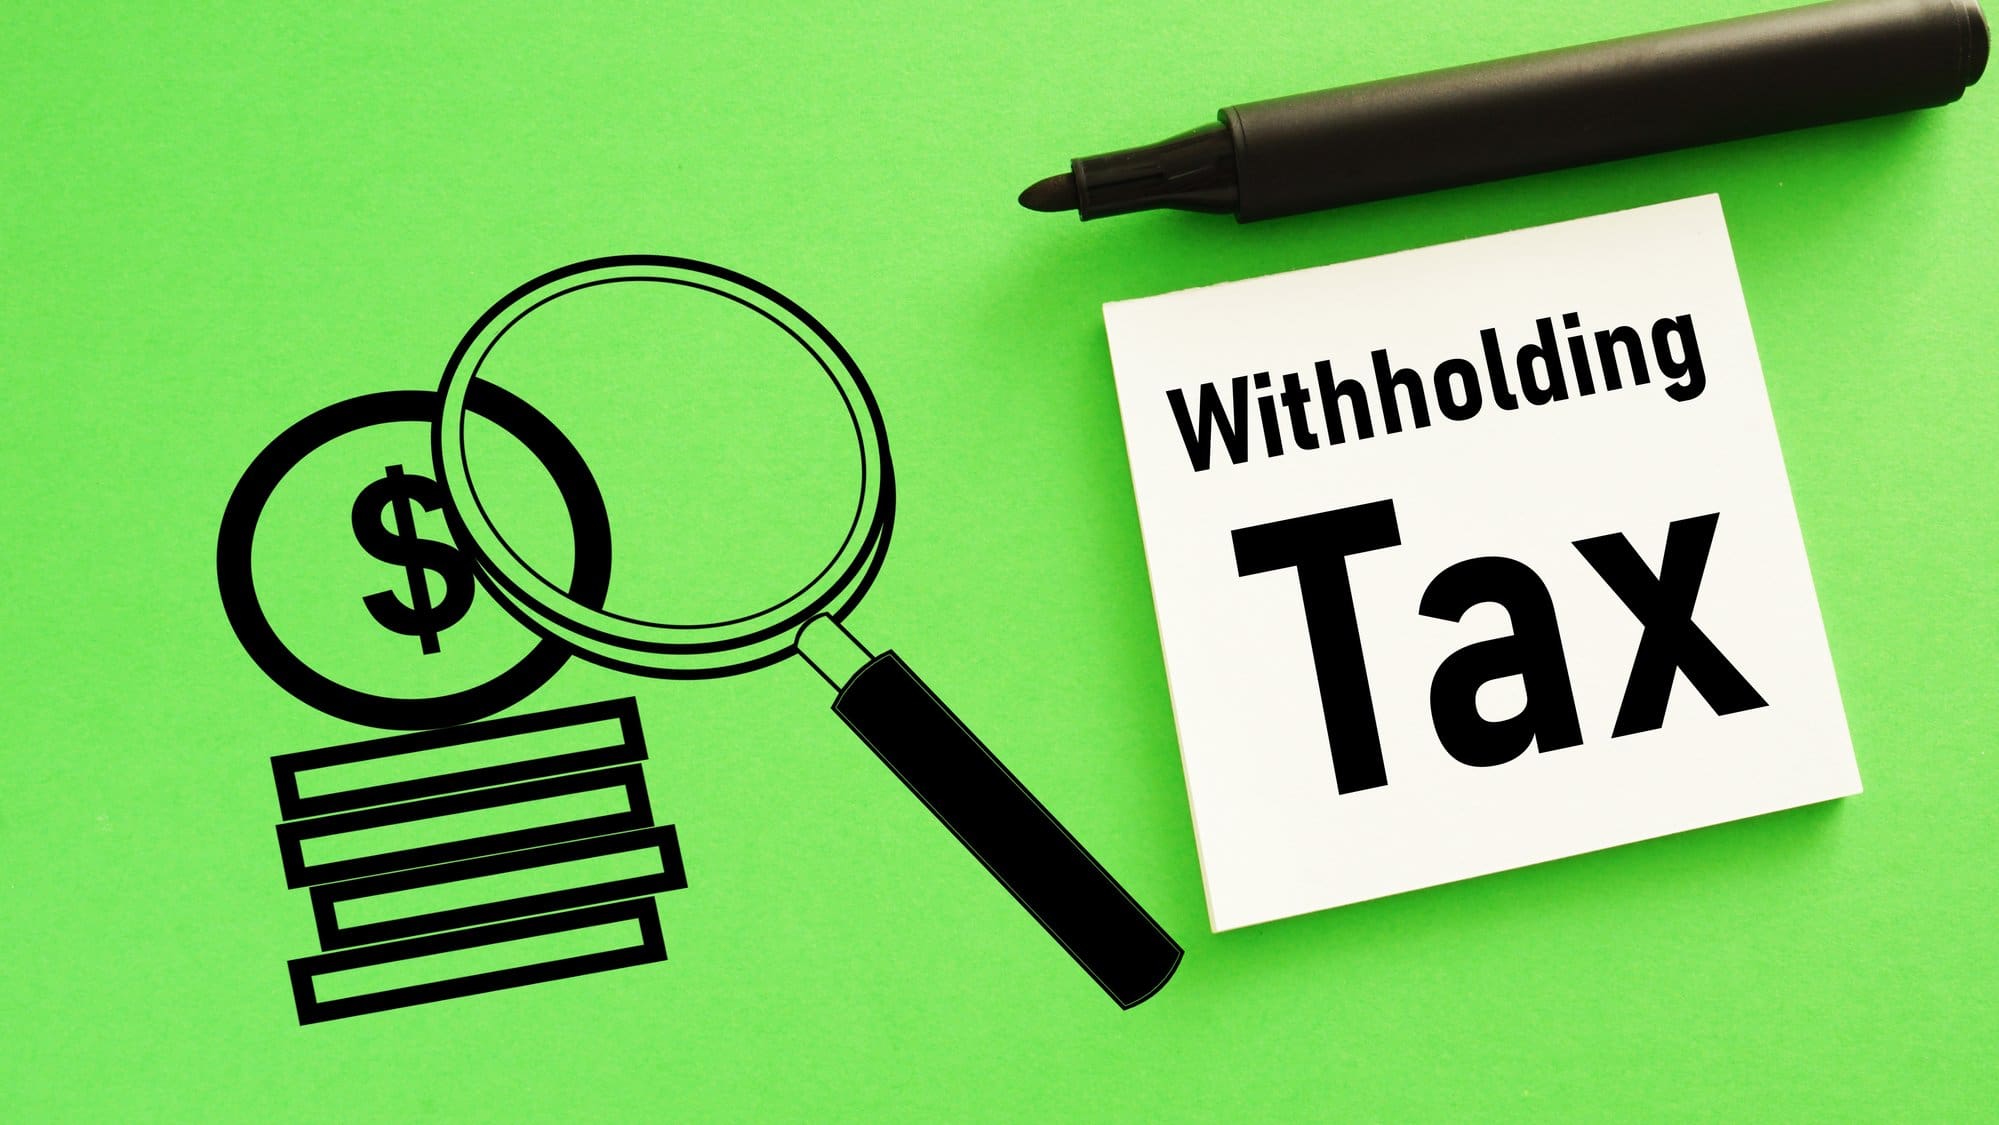 Withholding tax showing in text